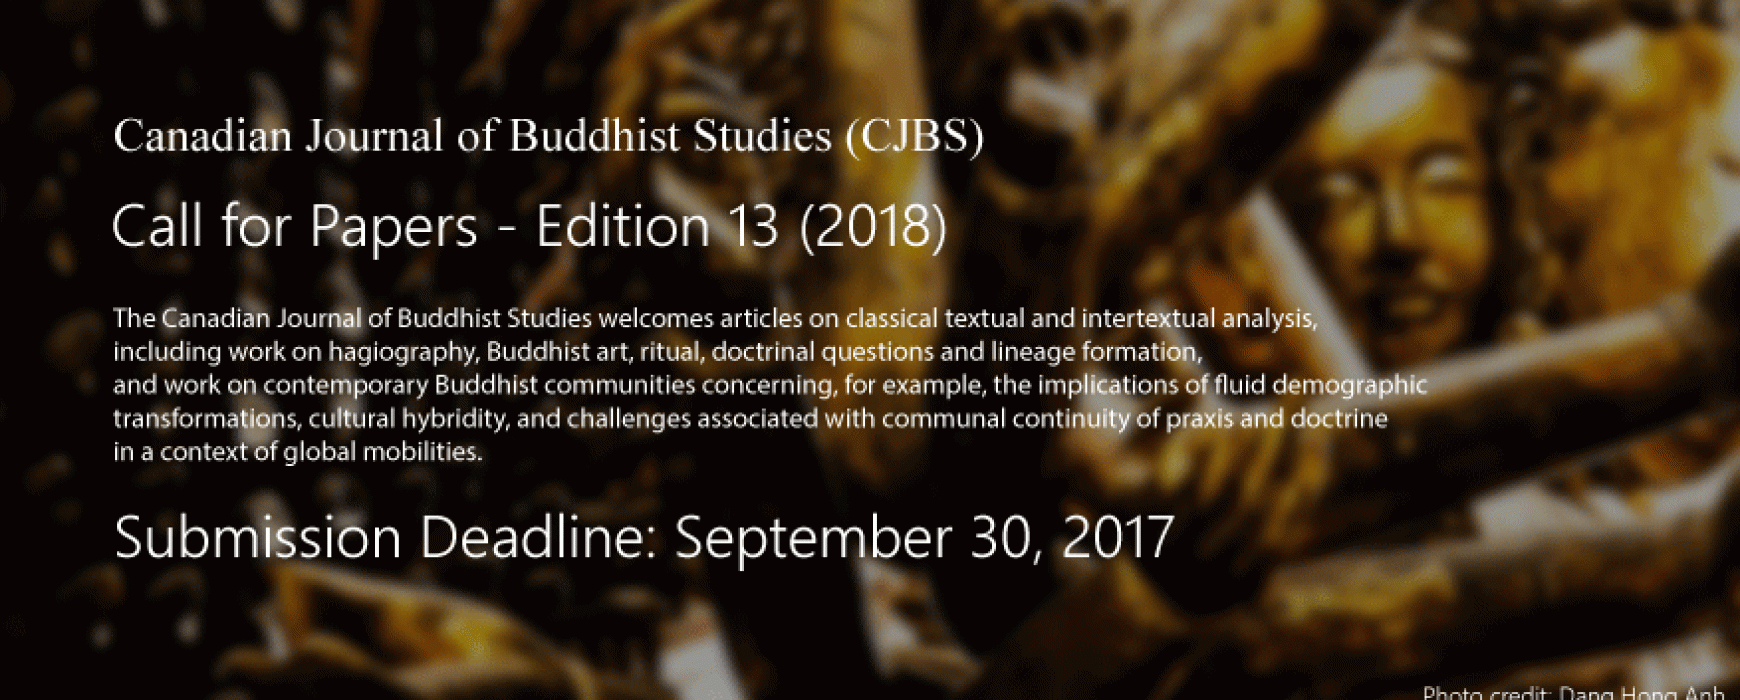 Canadian Journal of Buddhist Studies CFP 13th edition